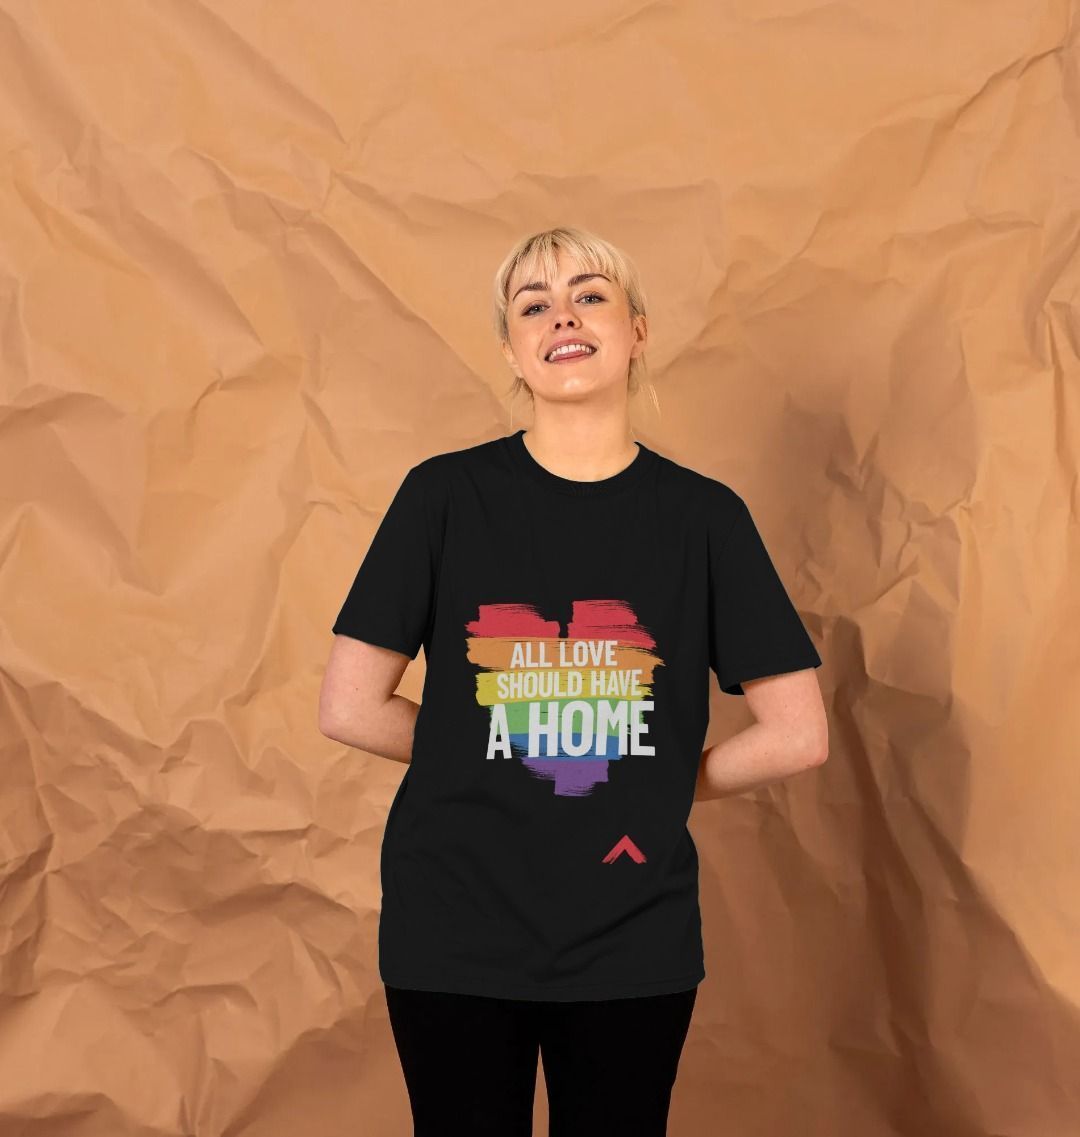 All Love Should Have a Home Black T-shirt, LGBTQ+ flag colour heart with white text slogan "All love should have a home"